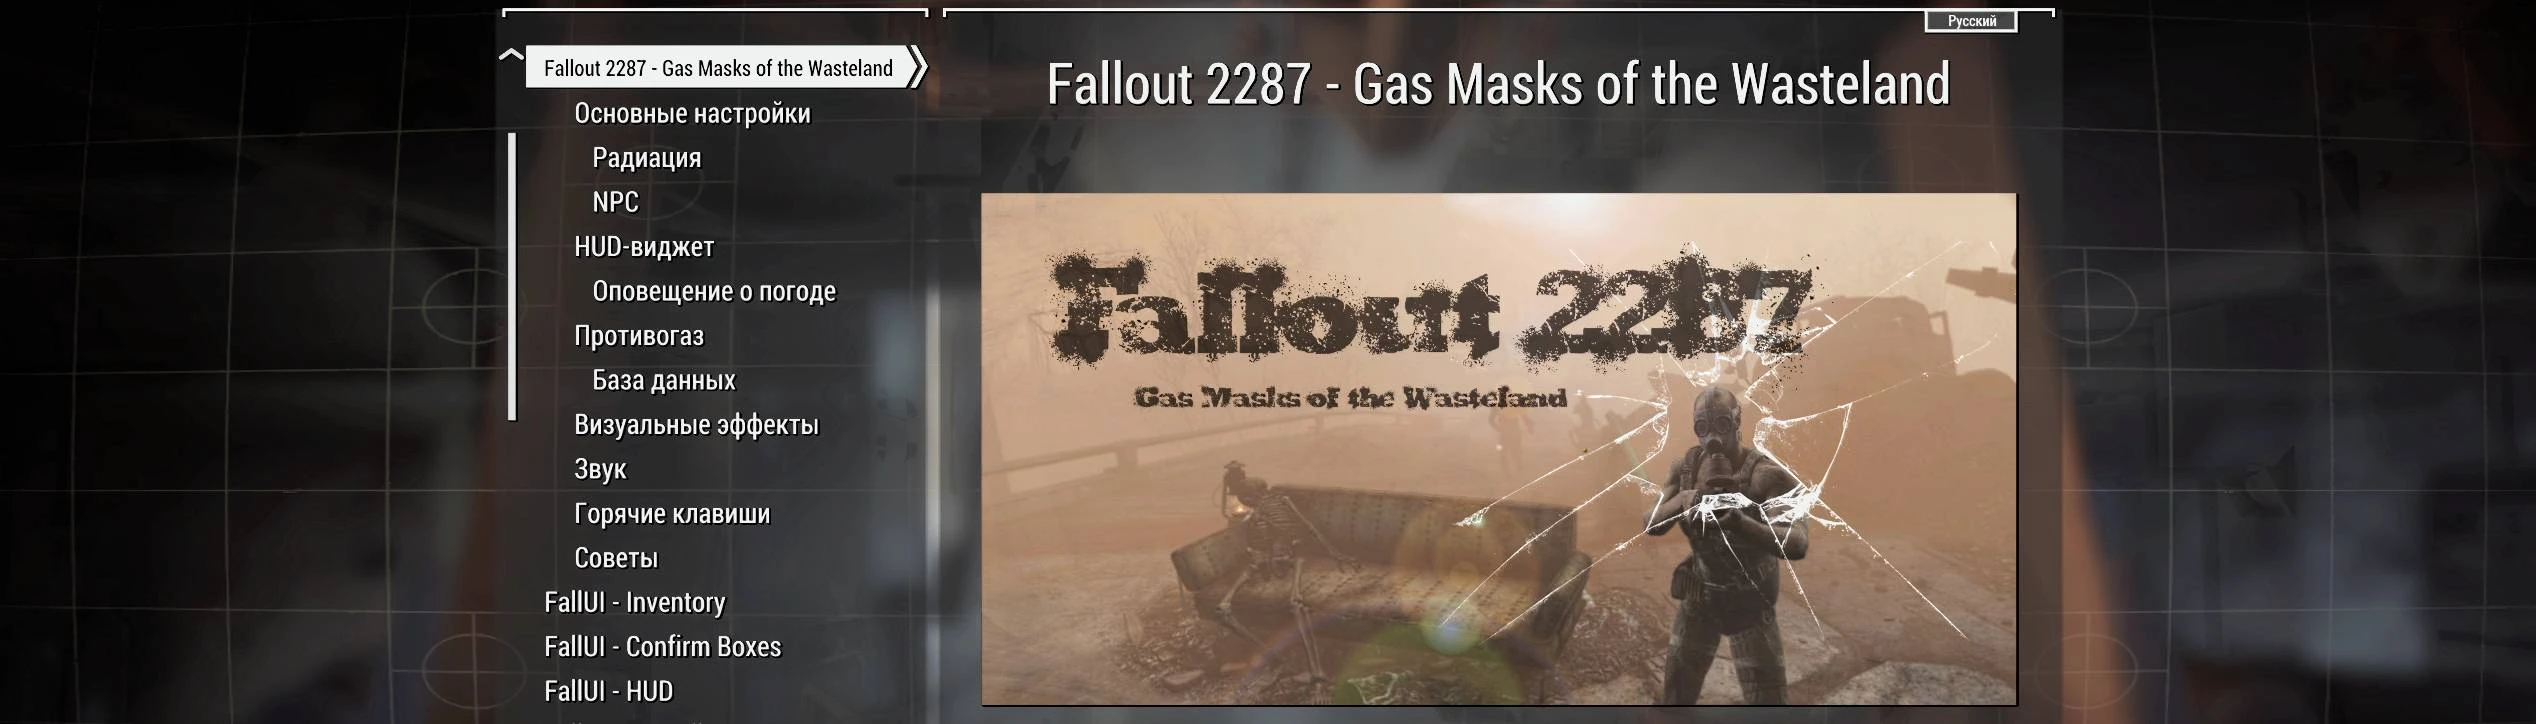 Fallout 2287 gas masks of the wasteland fallout 4 (119) фото